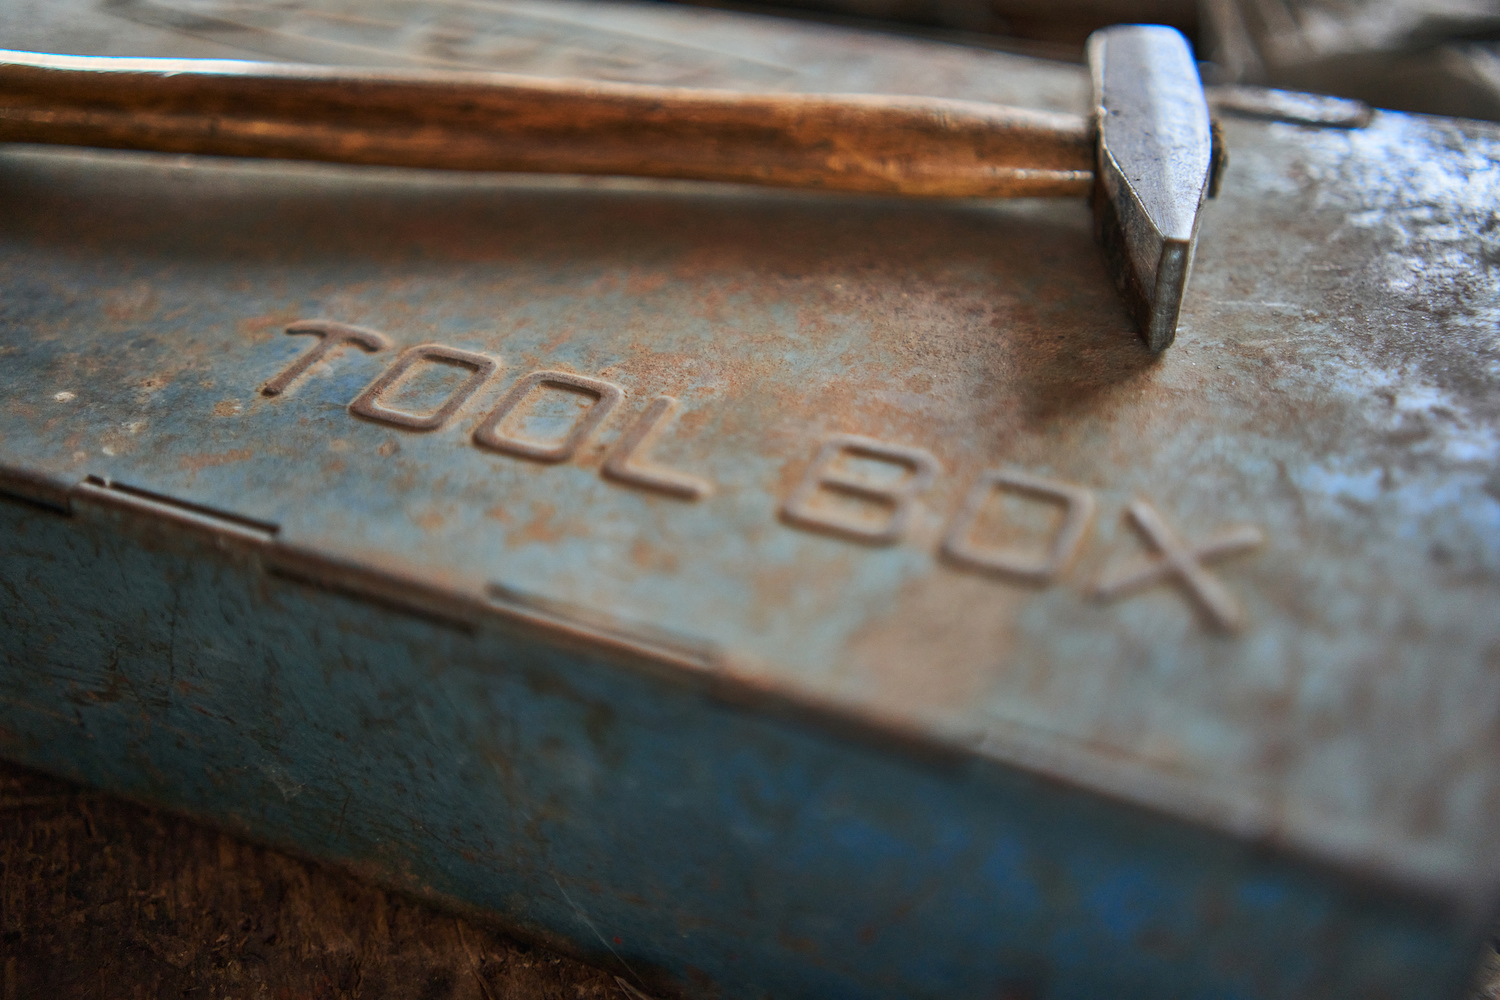 A worn toolbox with a hammer on the side